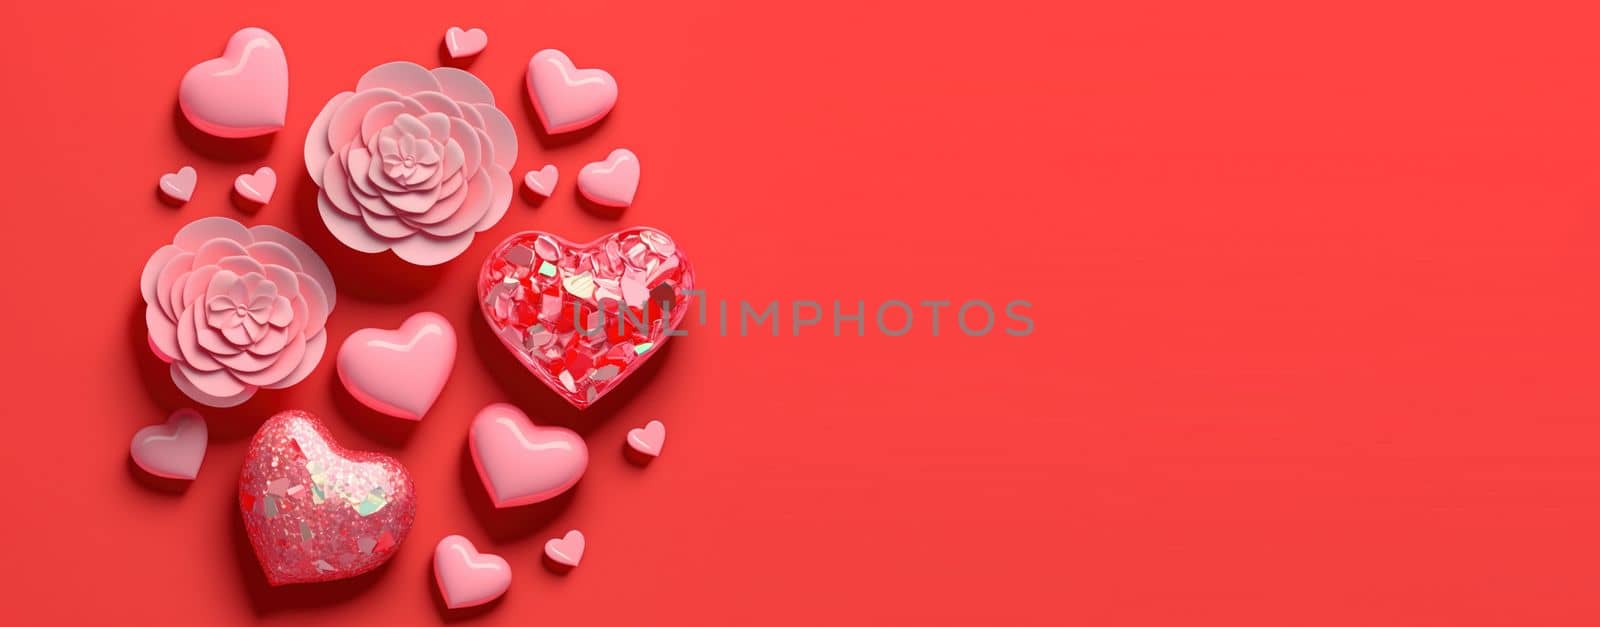 Sparkling 3D illustration of heart, diamond and flower shape for banner and background by templator